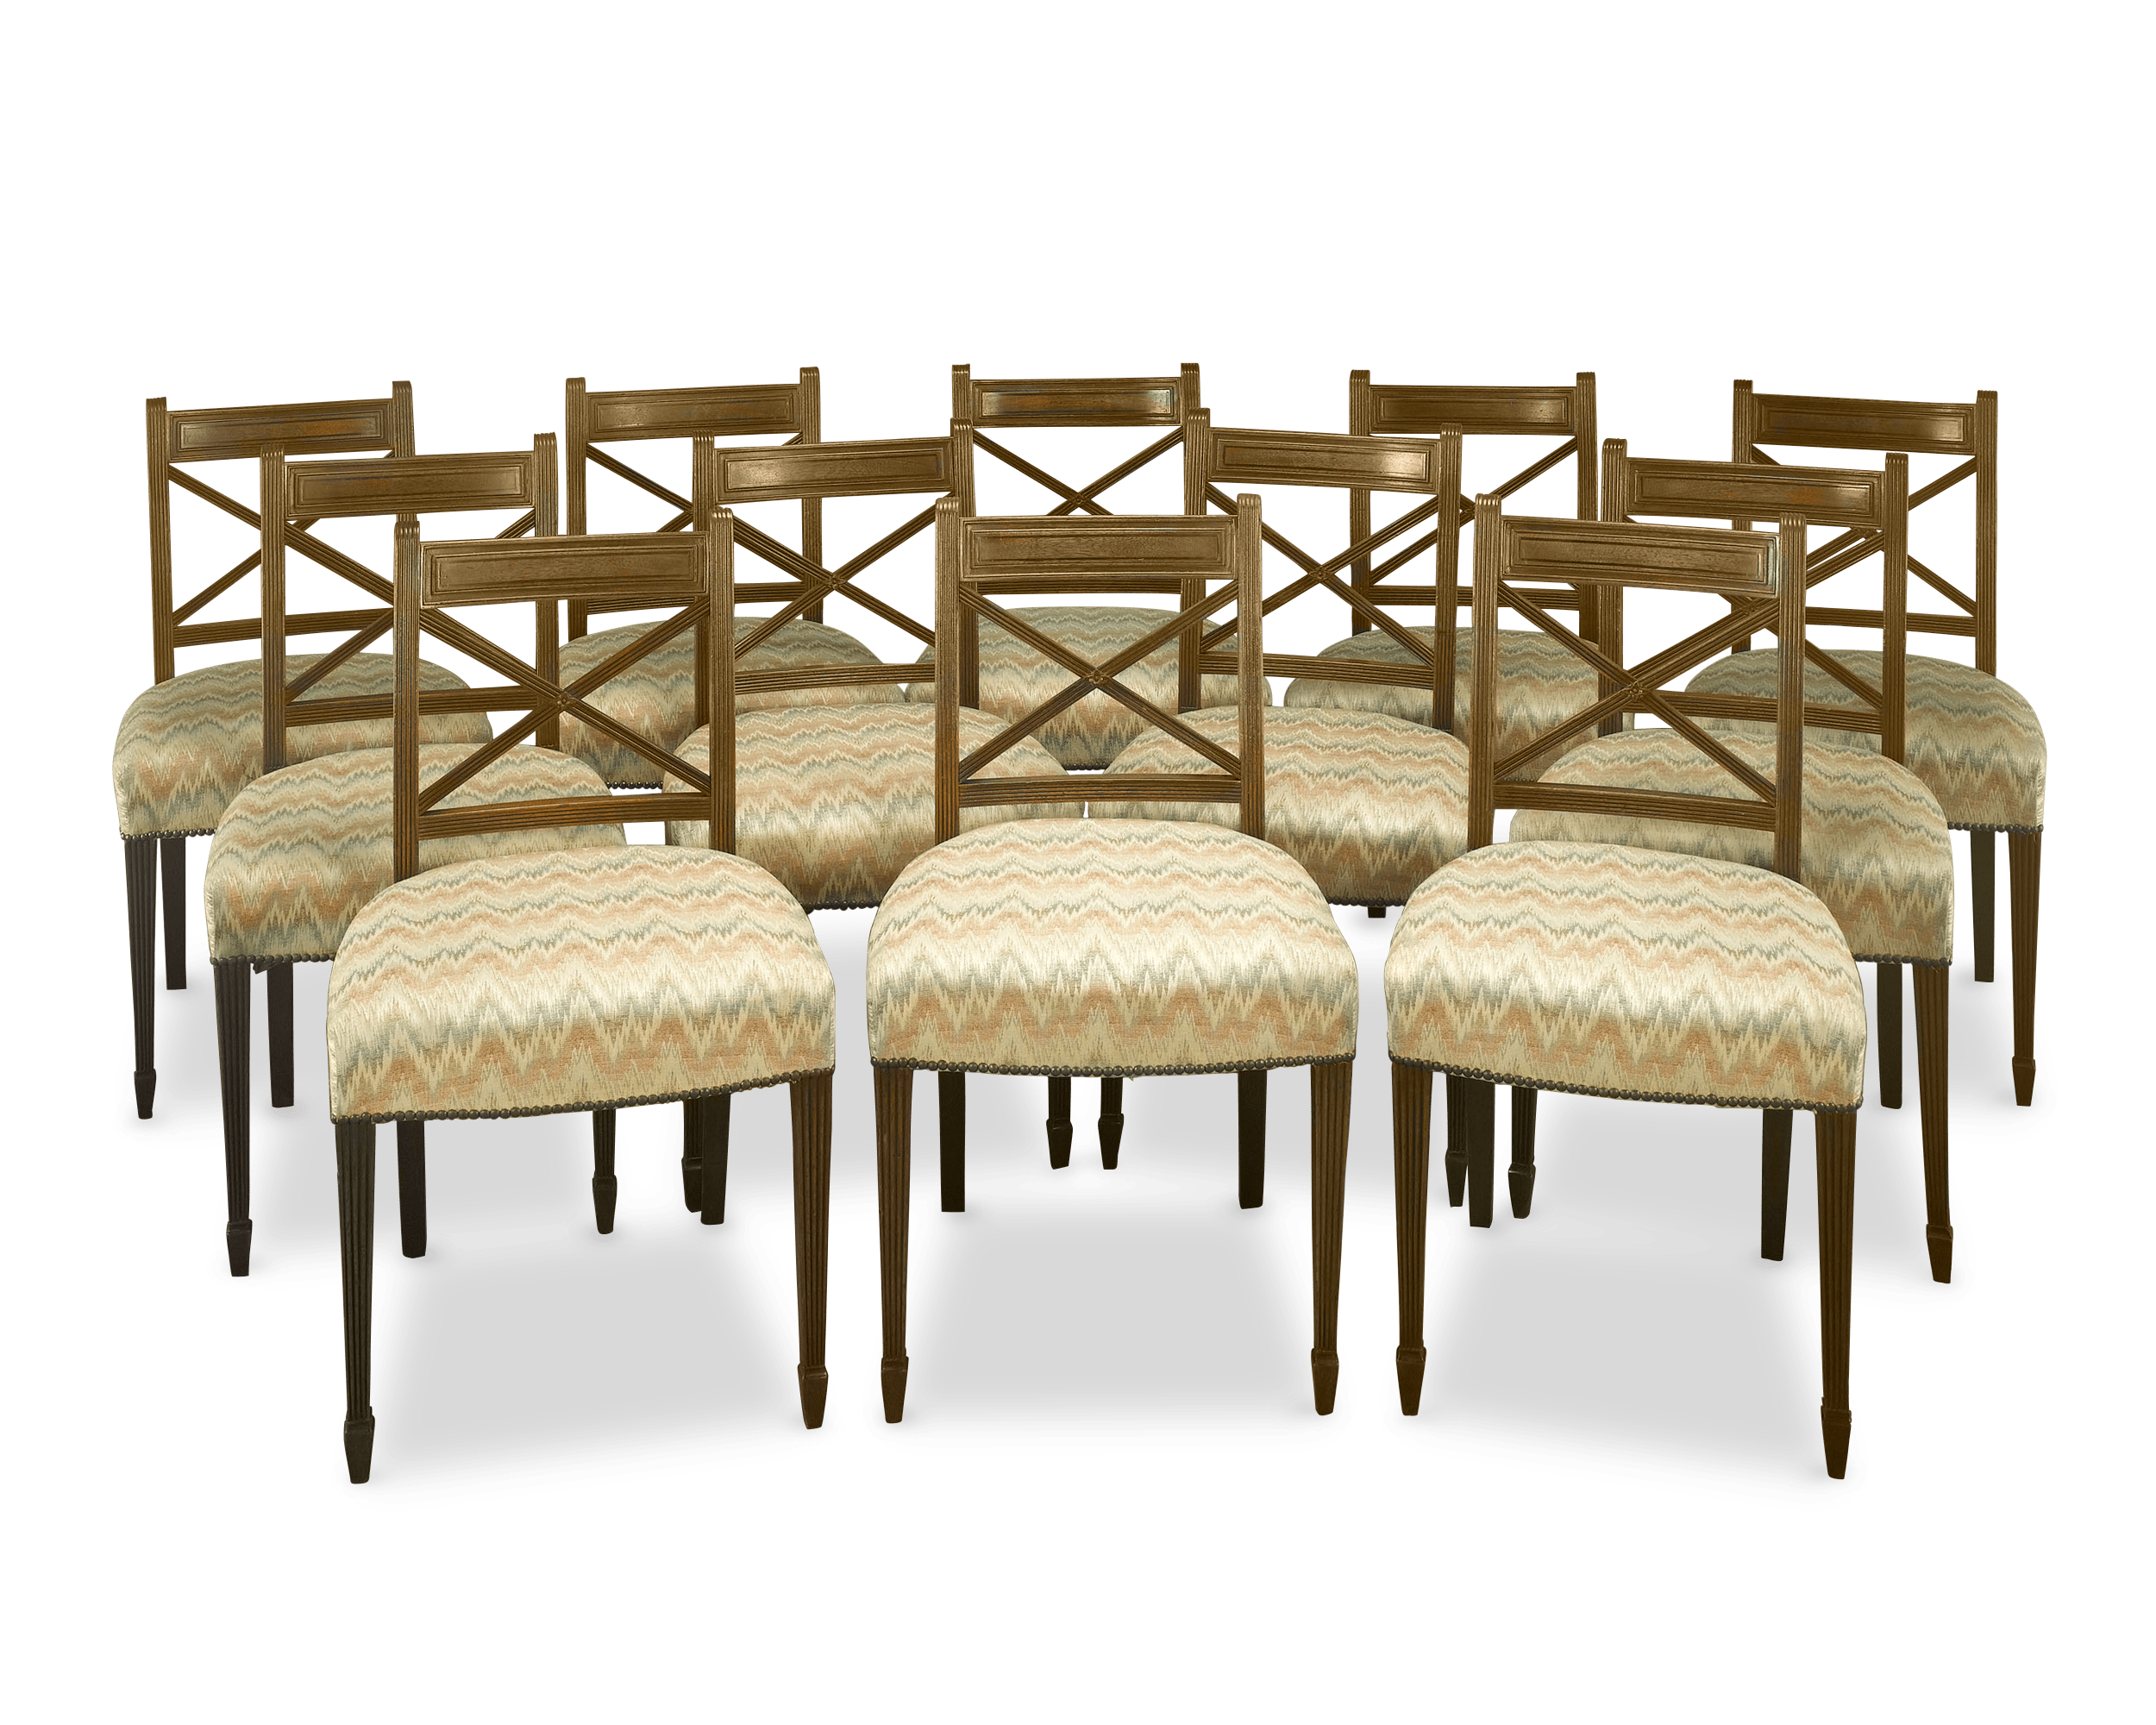 Magnificent design and construction distinguish this amazing set of Regency chairs